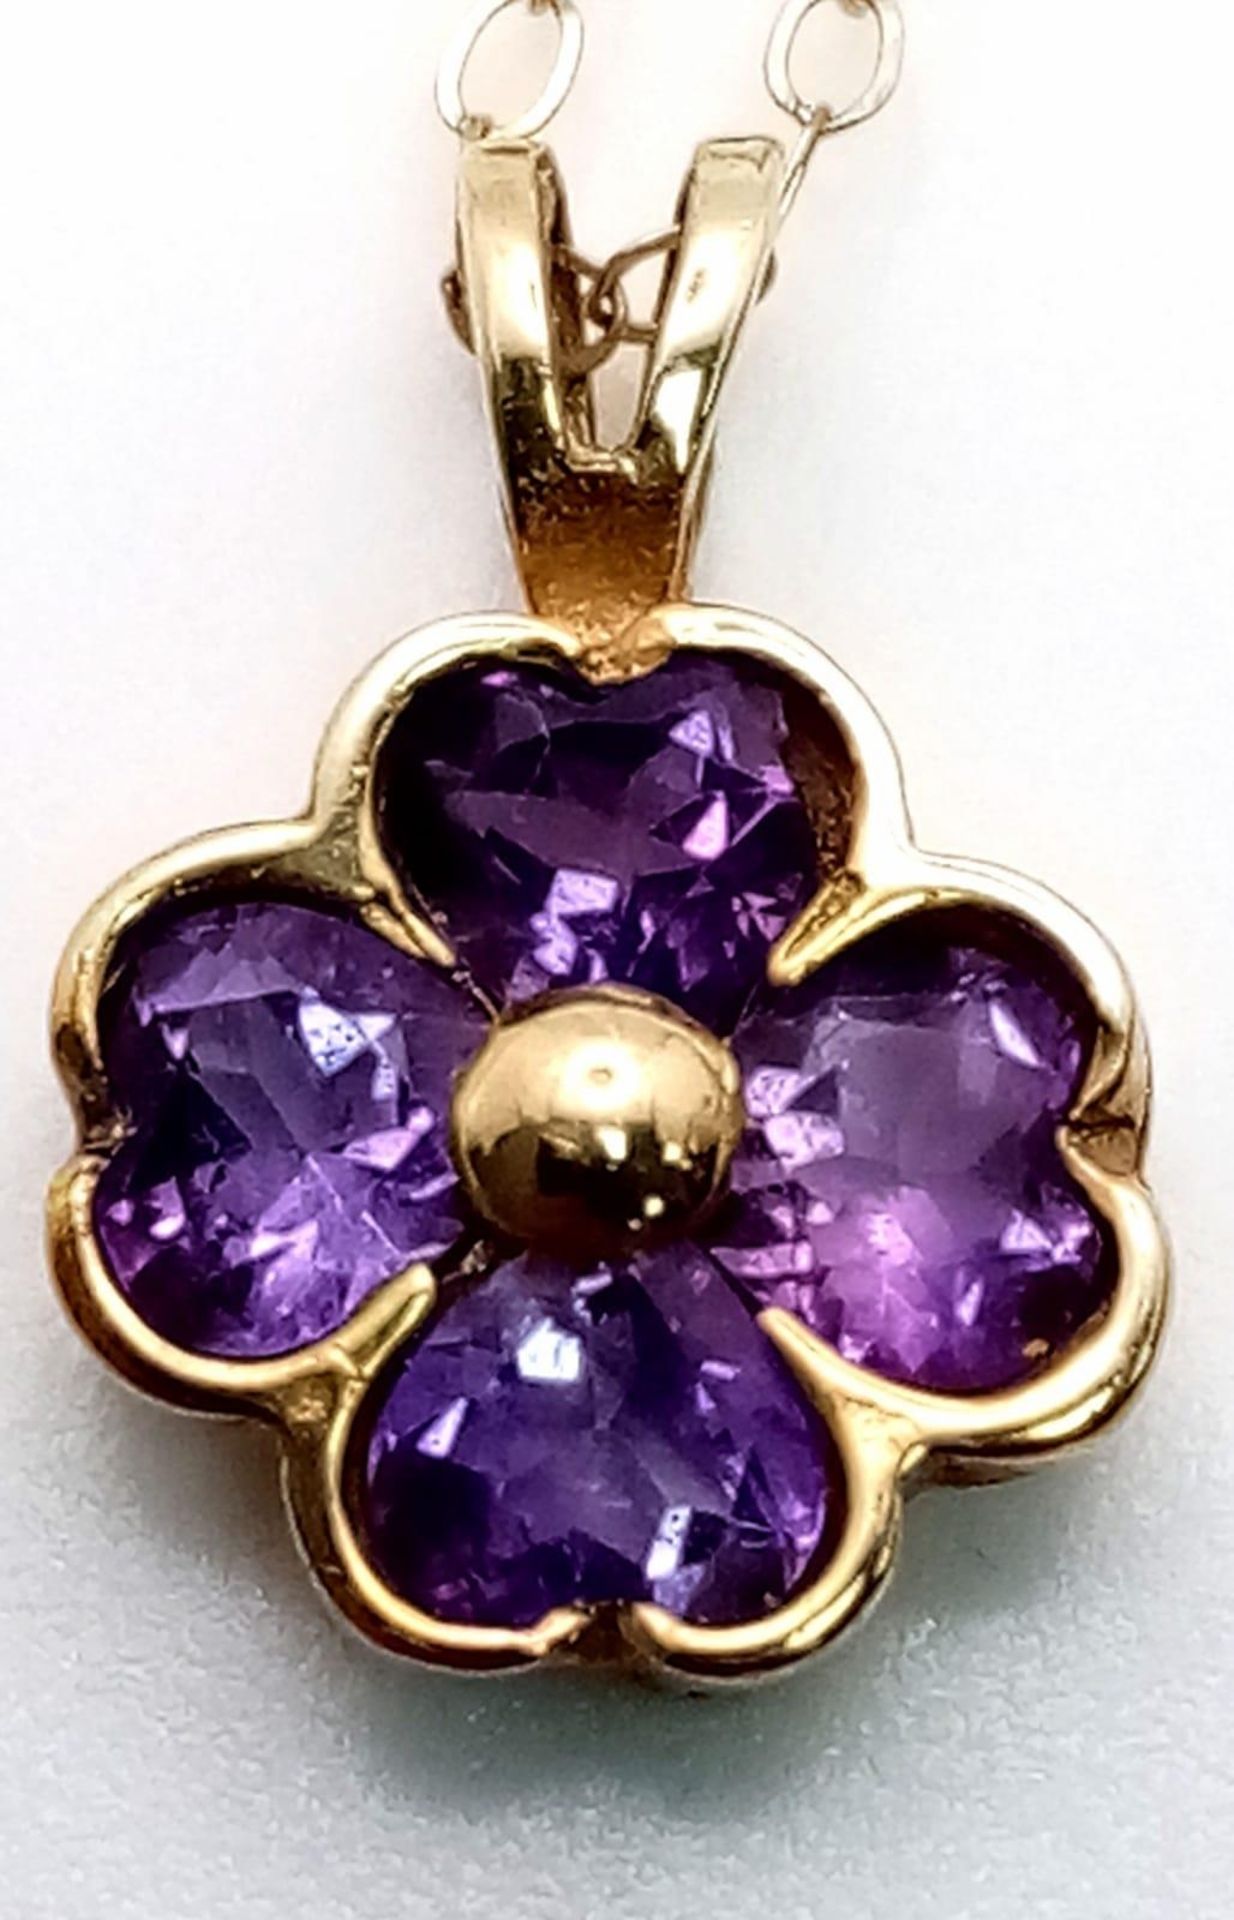 A pretty 9K Yellow Gold (tested as) Amethyst Flower pendant on Necklace, 1.3g total weight, 18” - Image 2 of 3